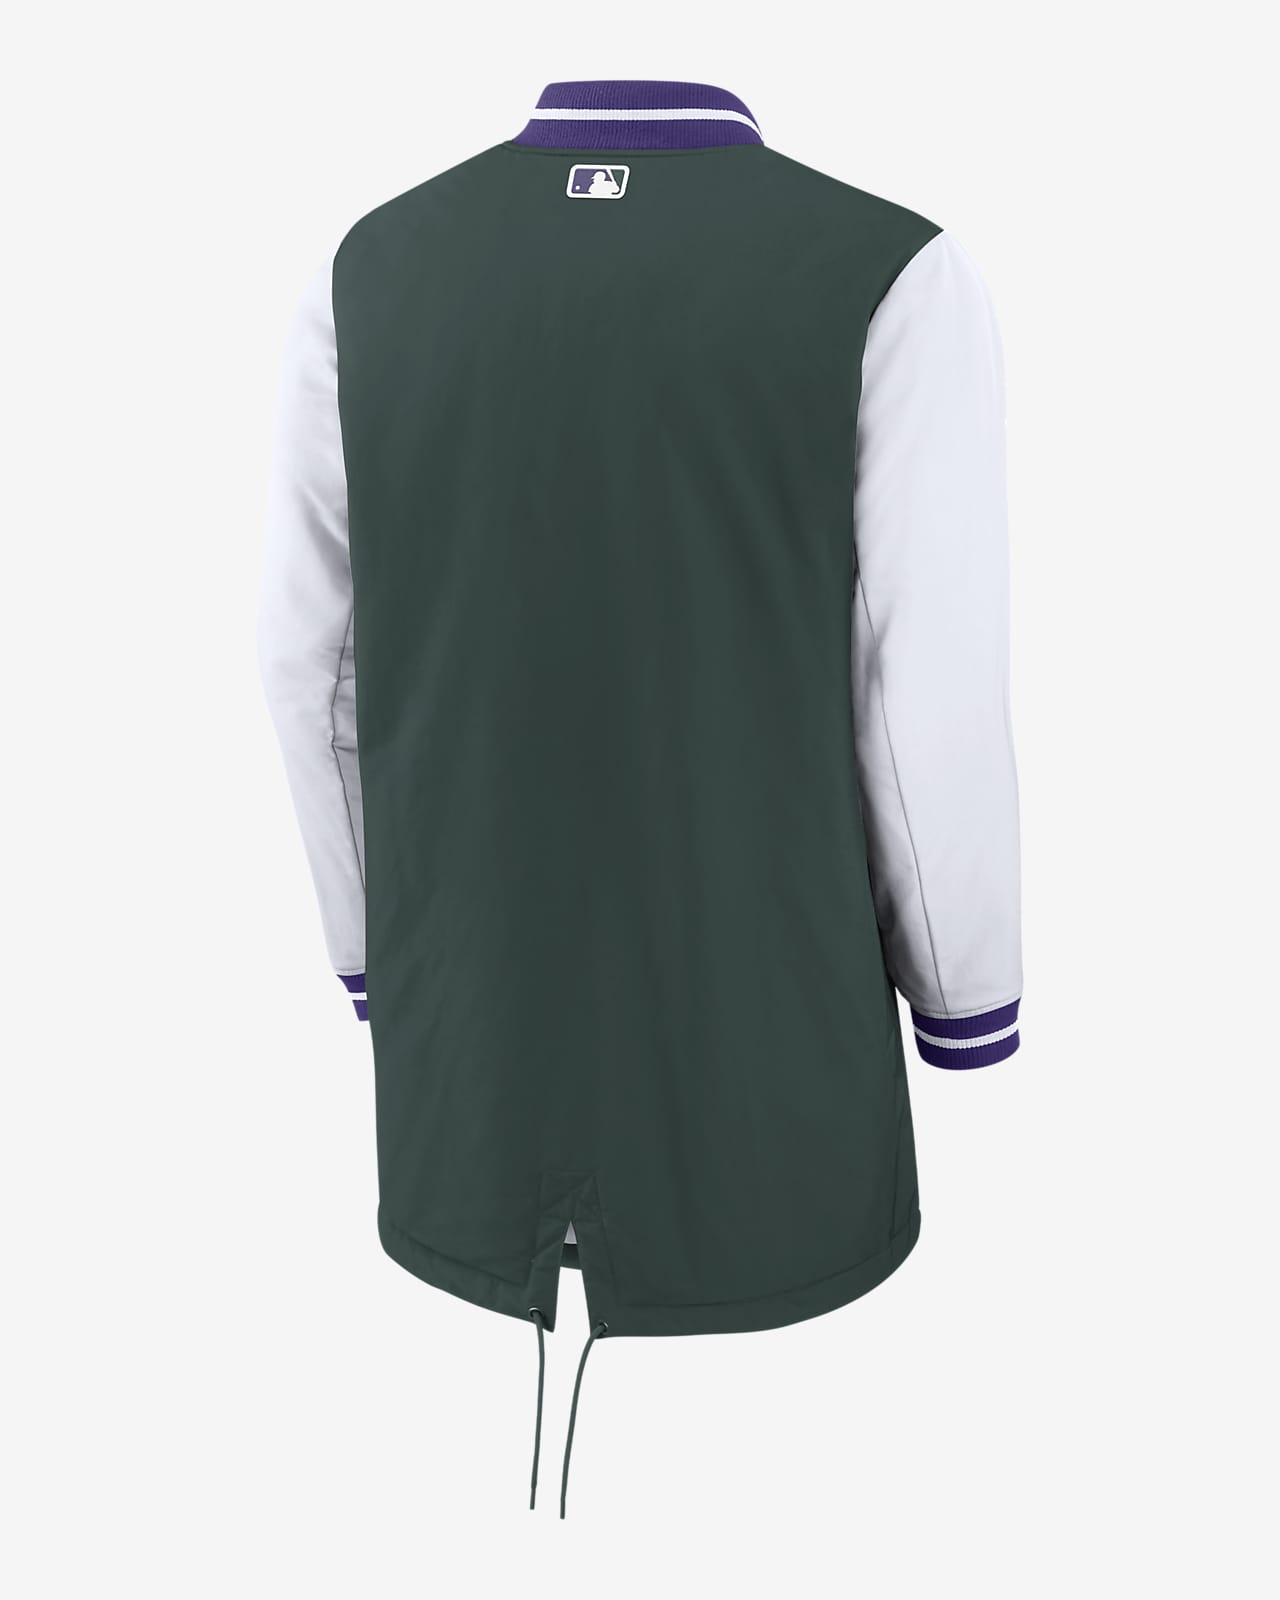 Nike Colorado Rockies City Connect Jersey NWT Size X-Large